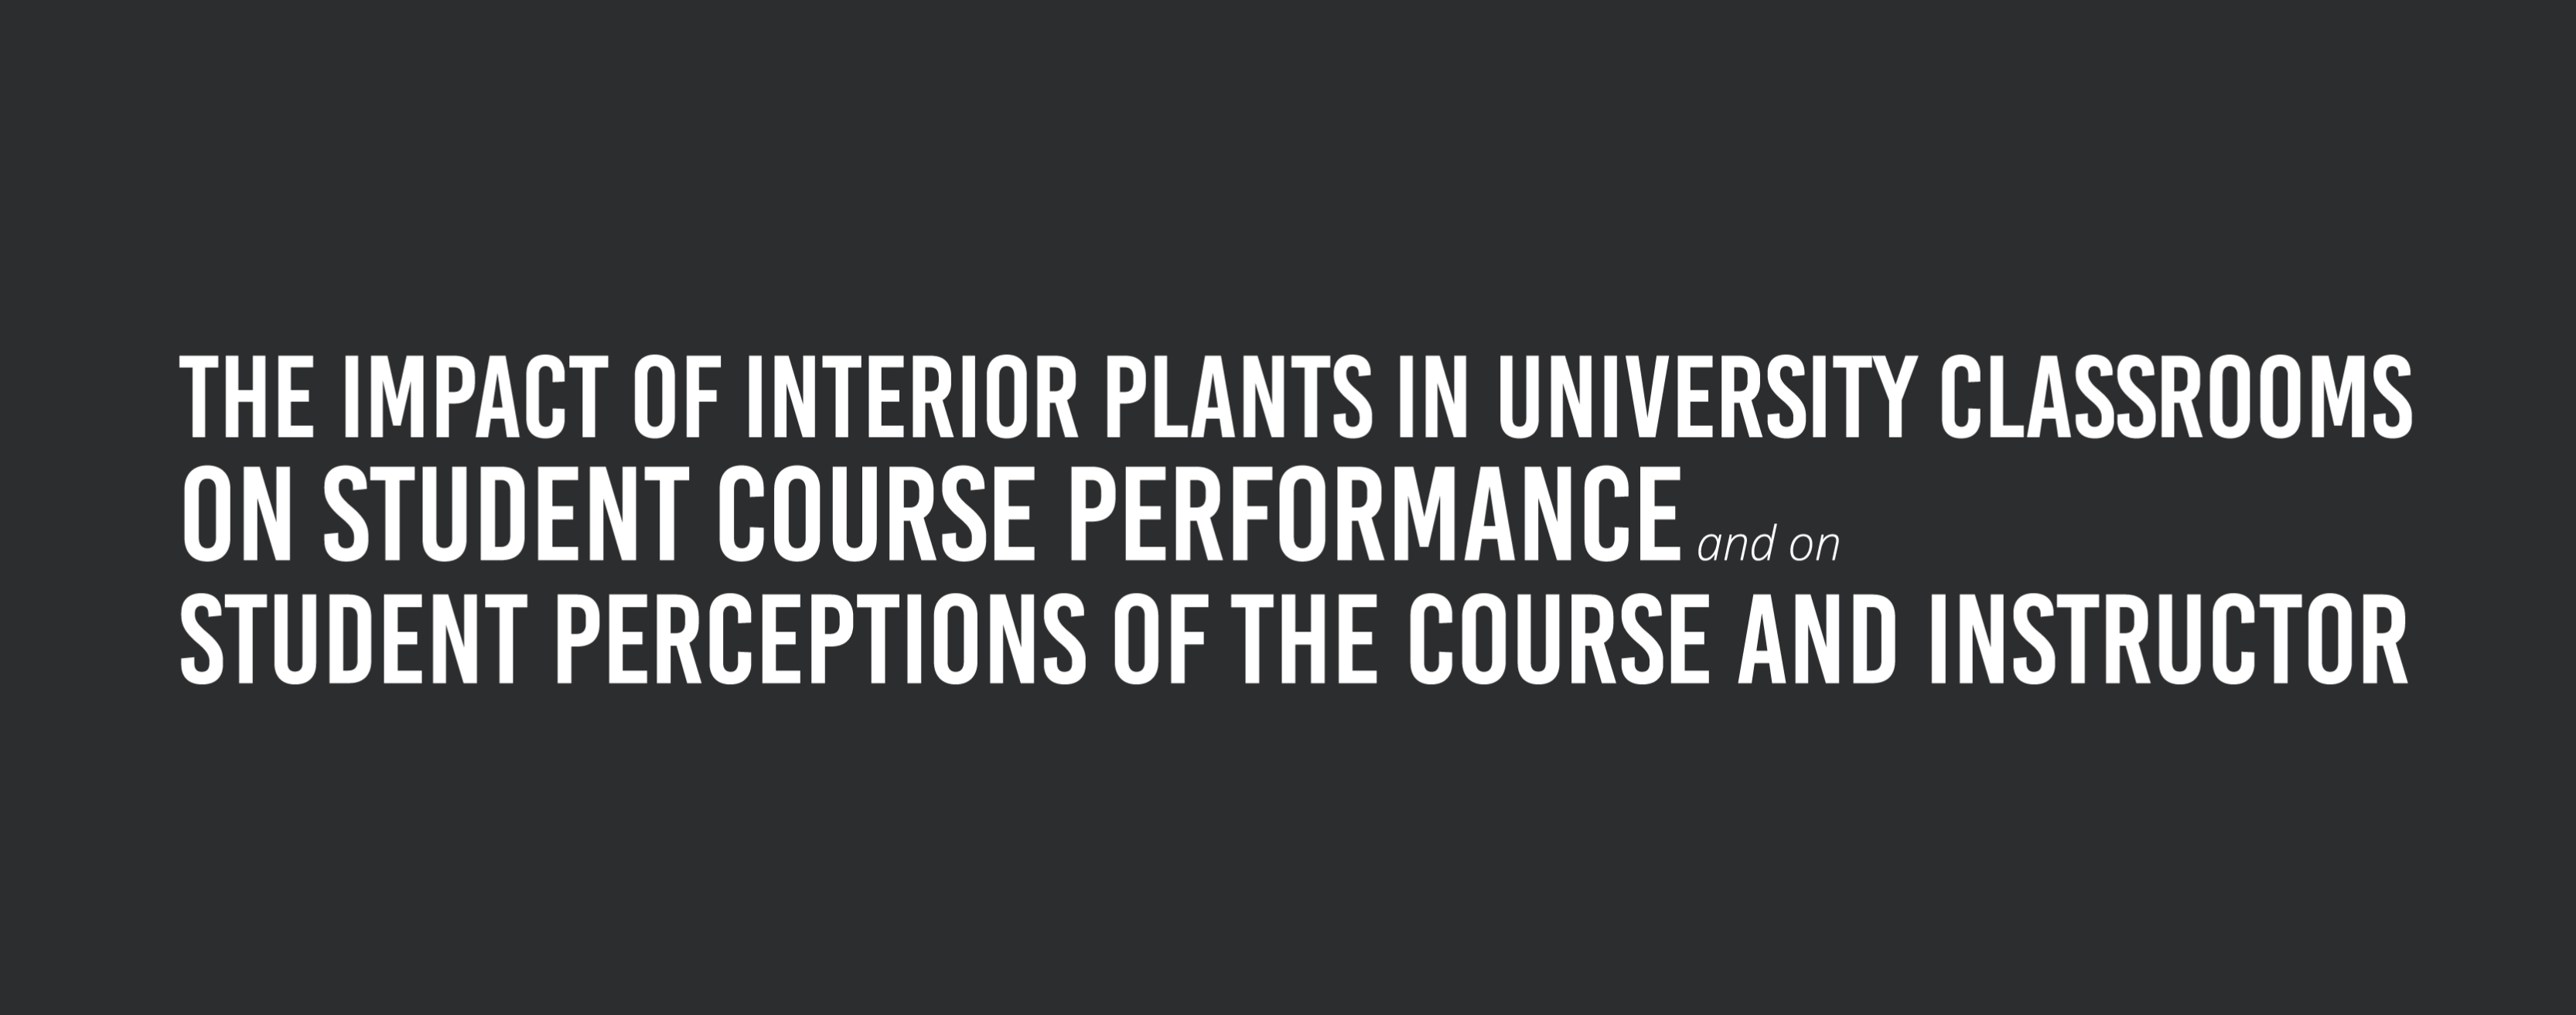 interior plants and student course performance